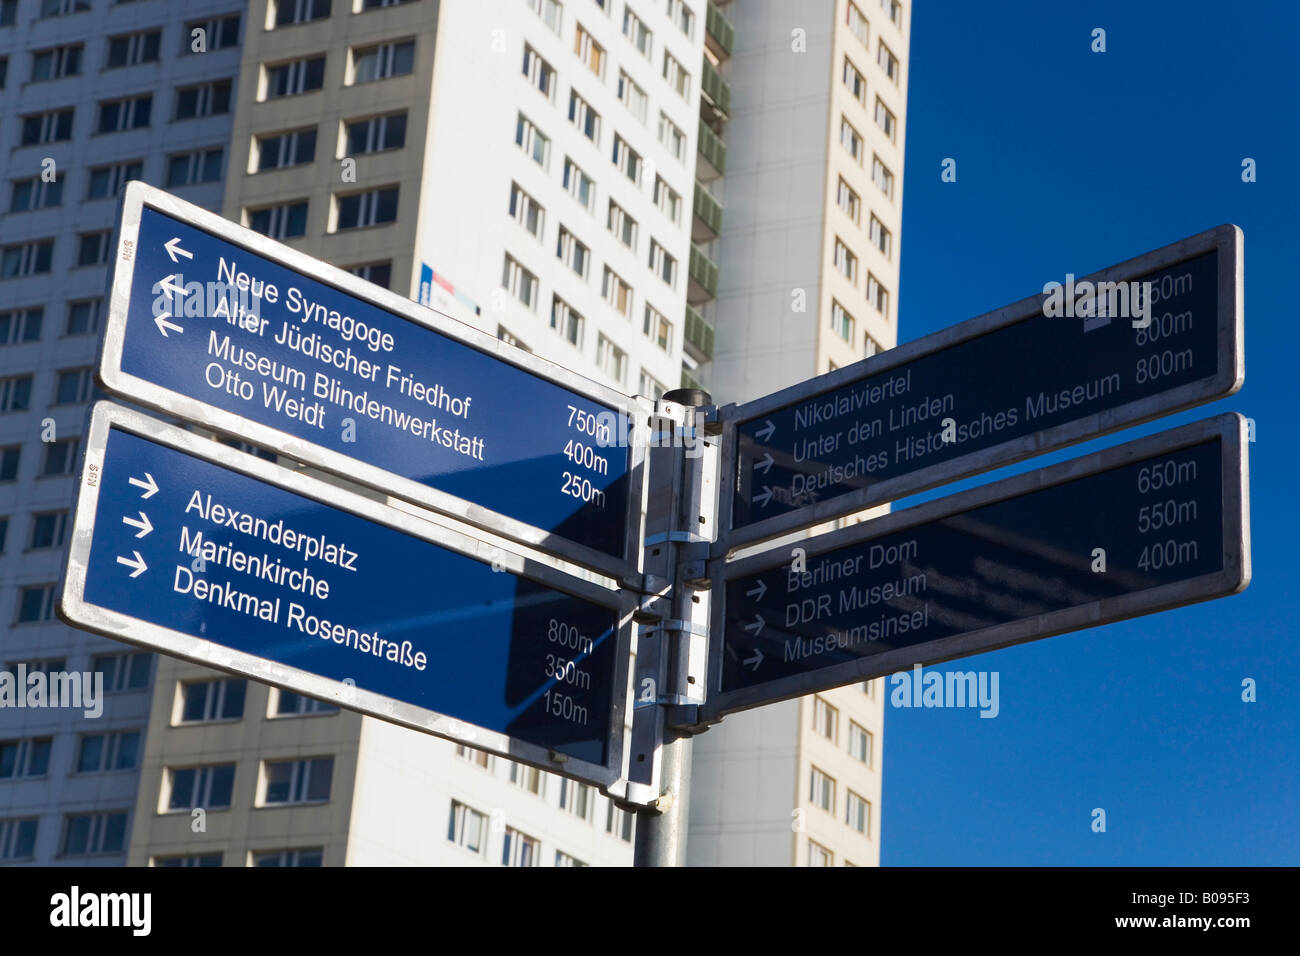 Directional sign indicating the way to various places of interest in Berlin, Germany Stock Photo